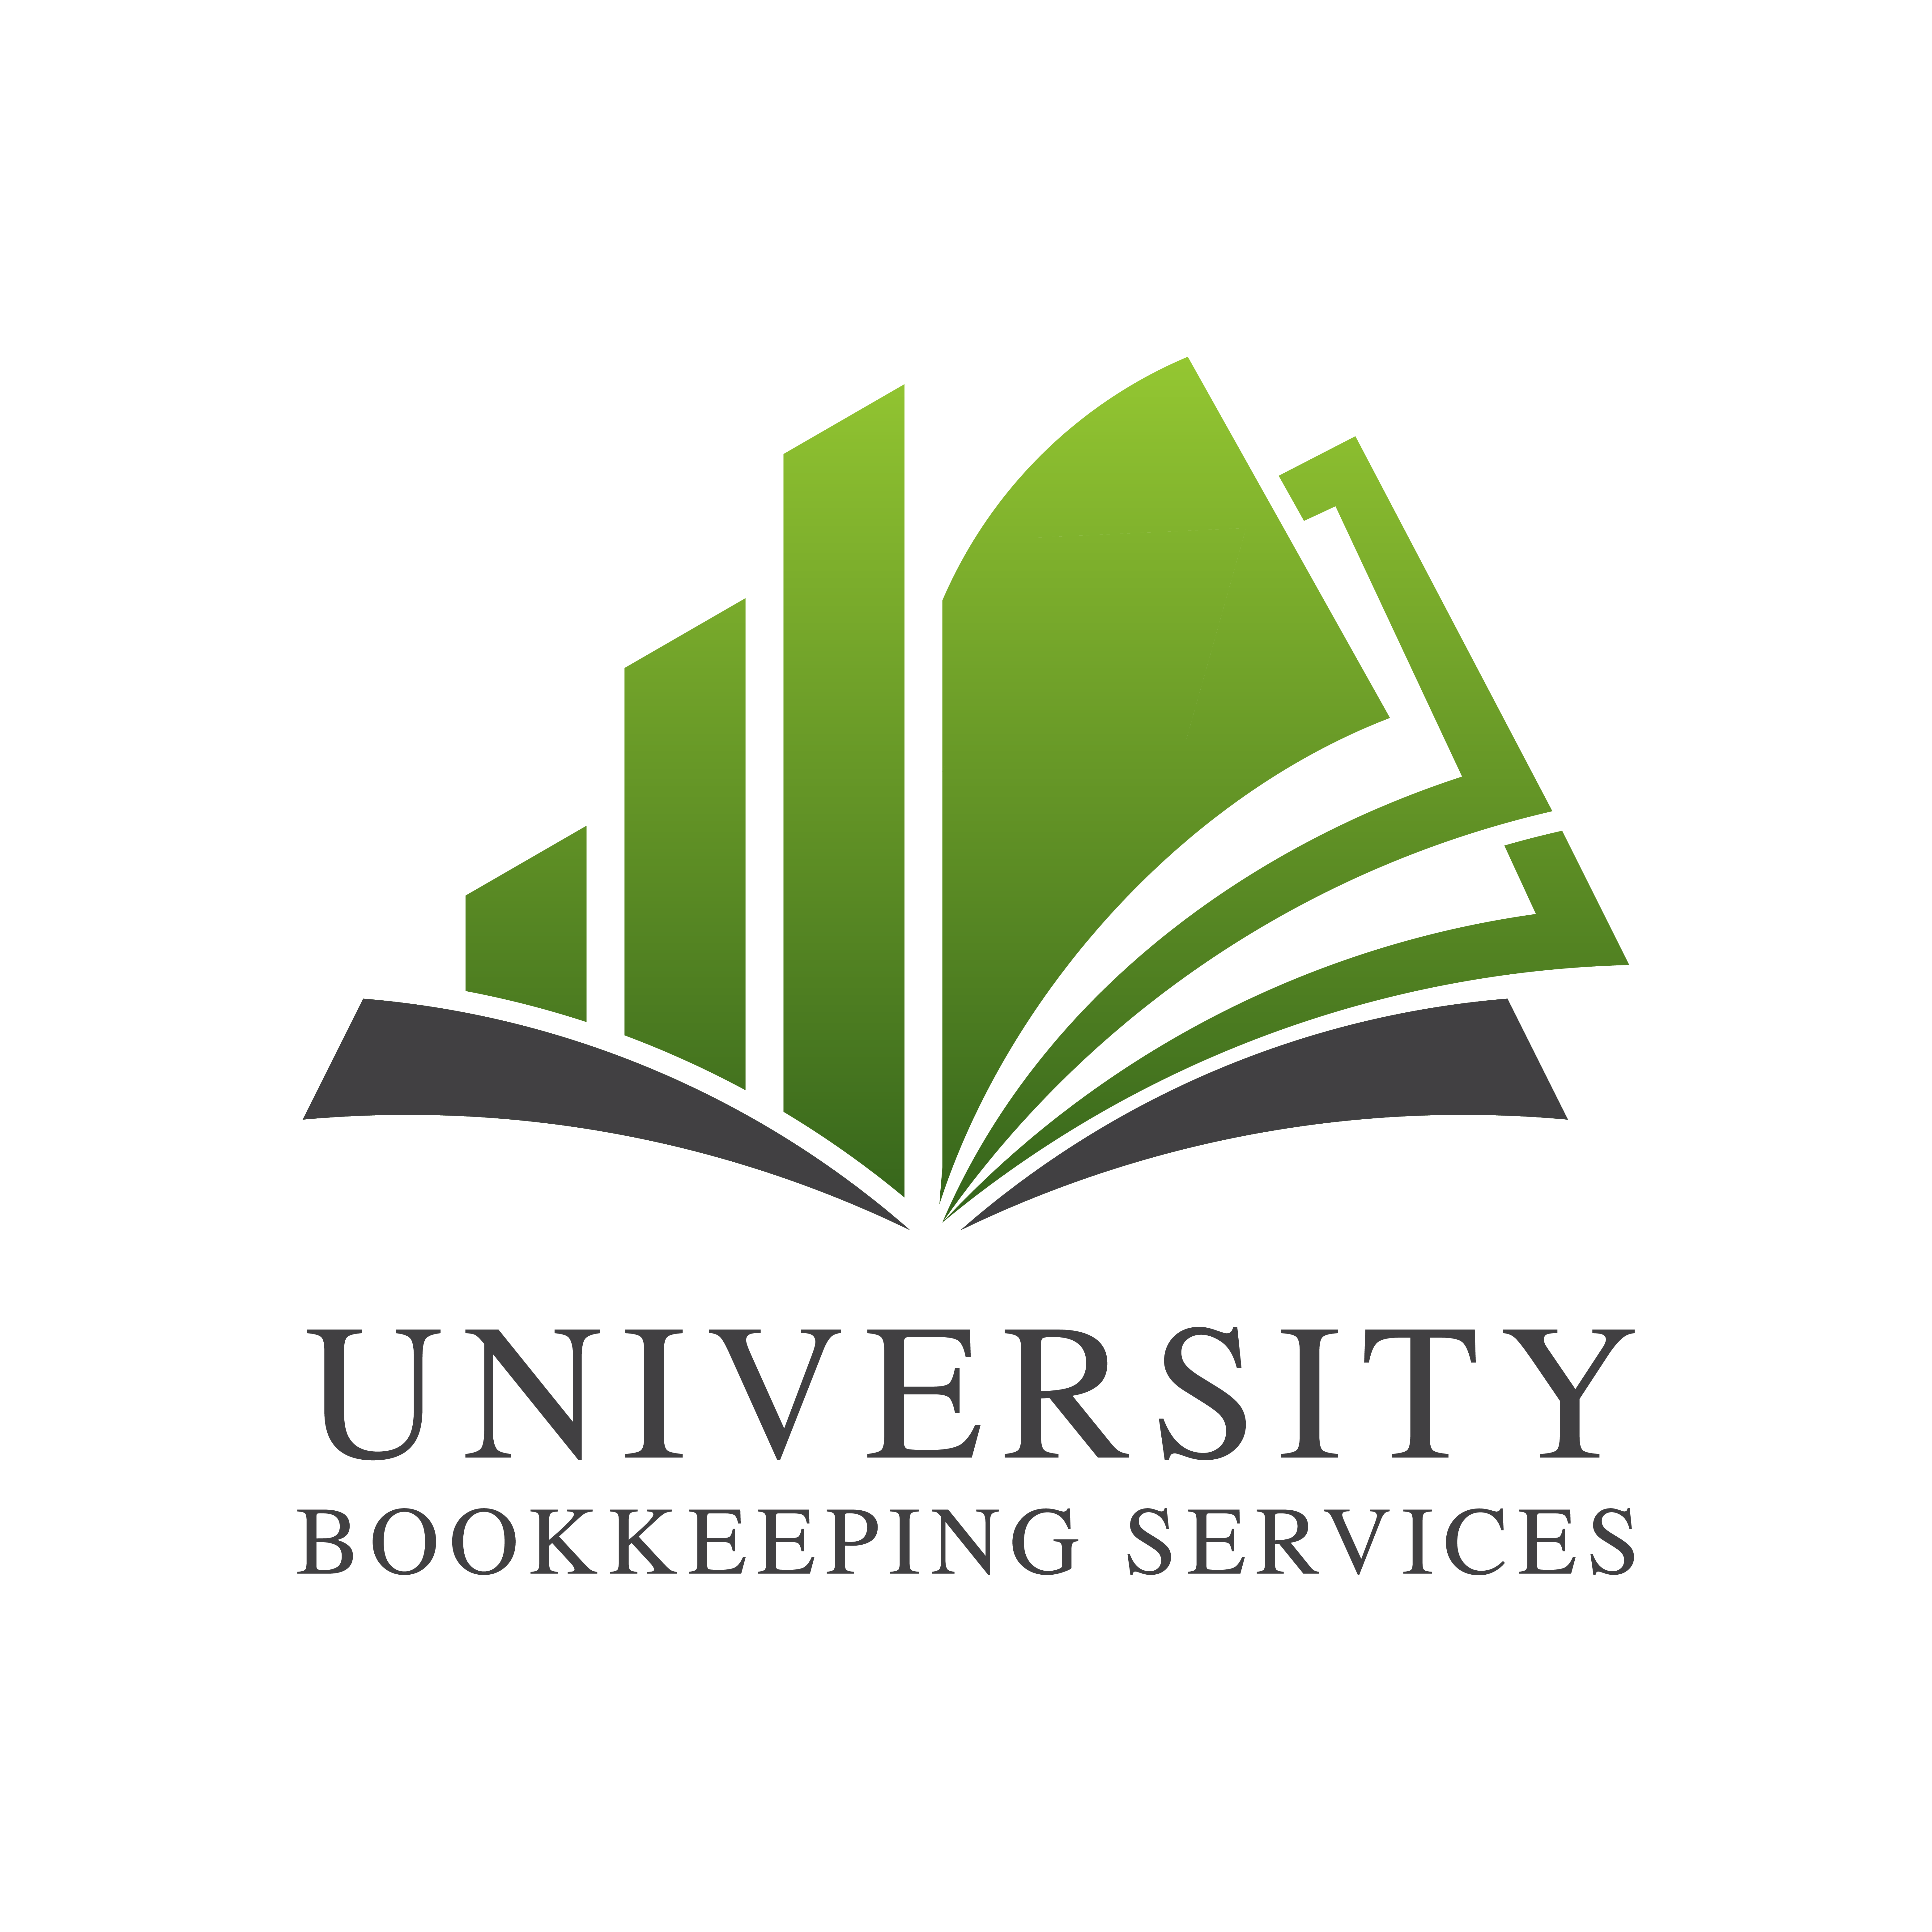 United States agency Horizon Digital Creatives helped University Bookkeeping Services grow their business with SEO and digital marketing